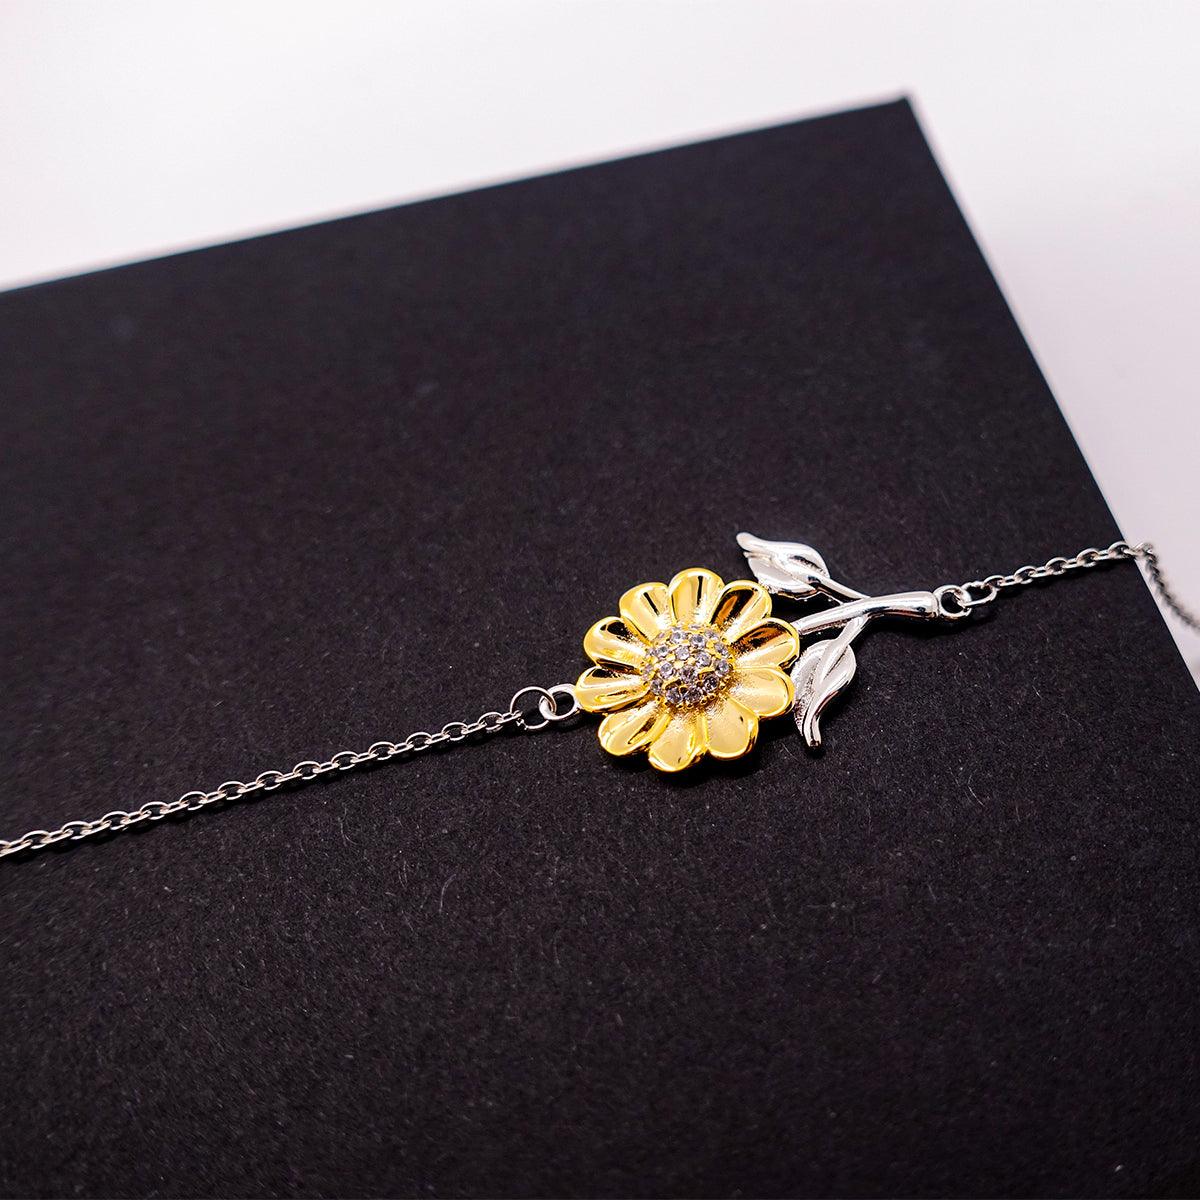 Attendant Sunflower Bracelet - Thanks for being who you are - Birthday Christmas Jewelry Gifts Coworkers Colleague Boss - Mallard Moon Gift Shop